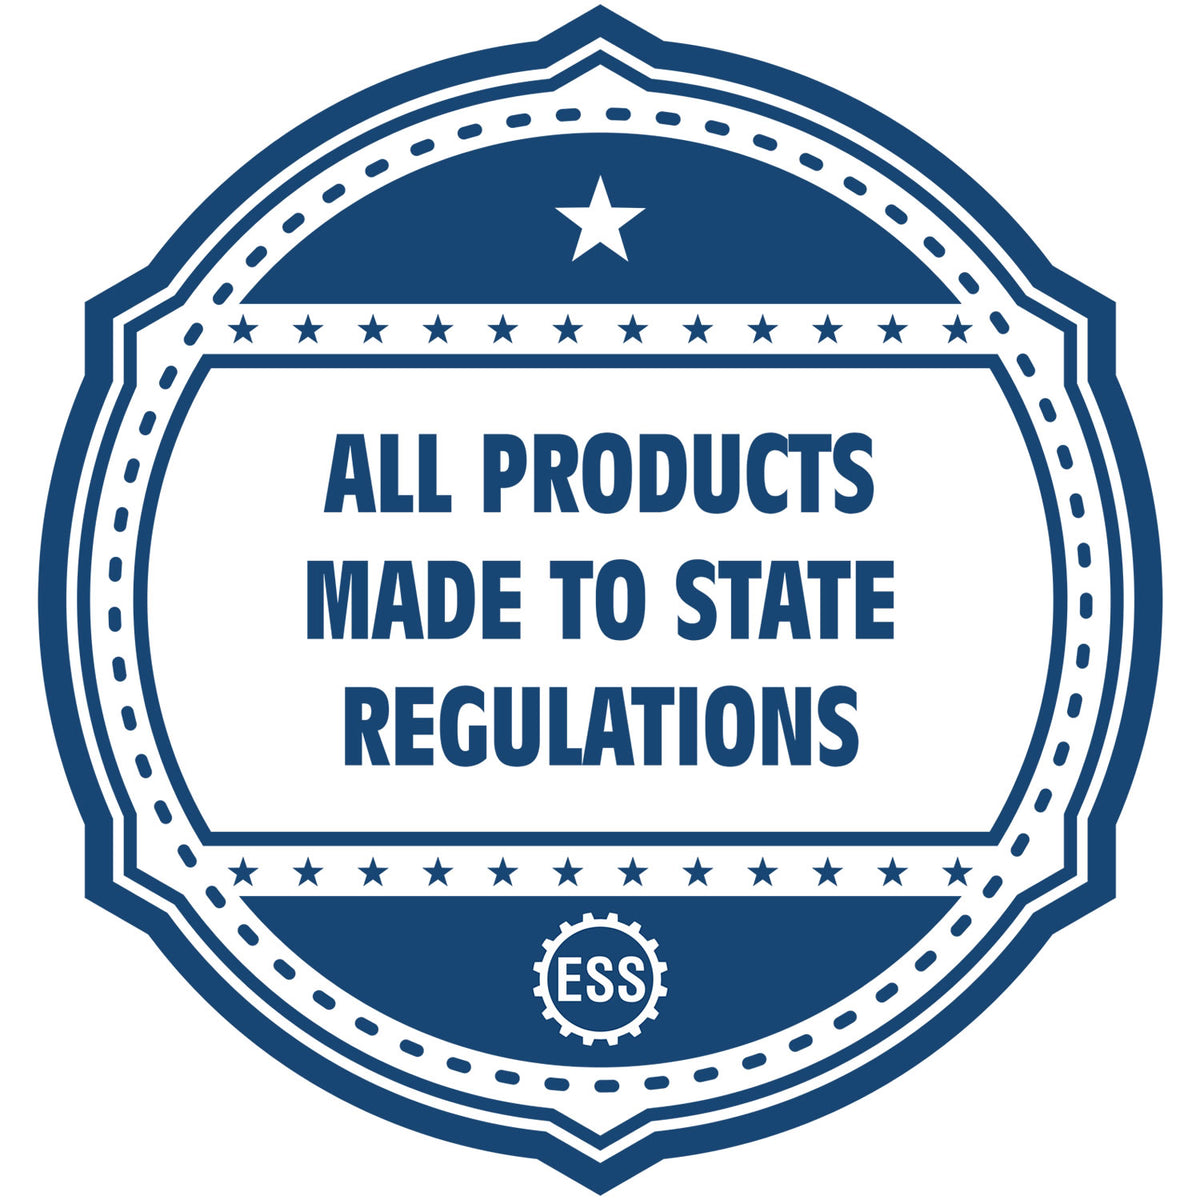 An icon or badge element for the Heavy Duty Cast Iron Nebraska Engineer Seal Embosser showing that this product is made in compliance with state regulations.